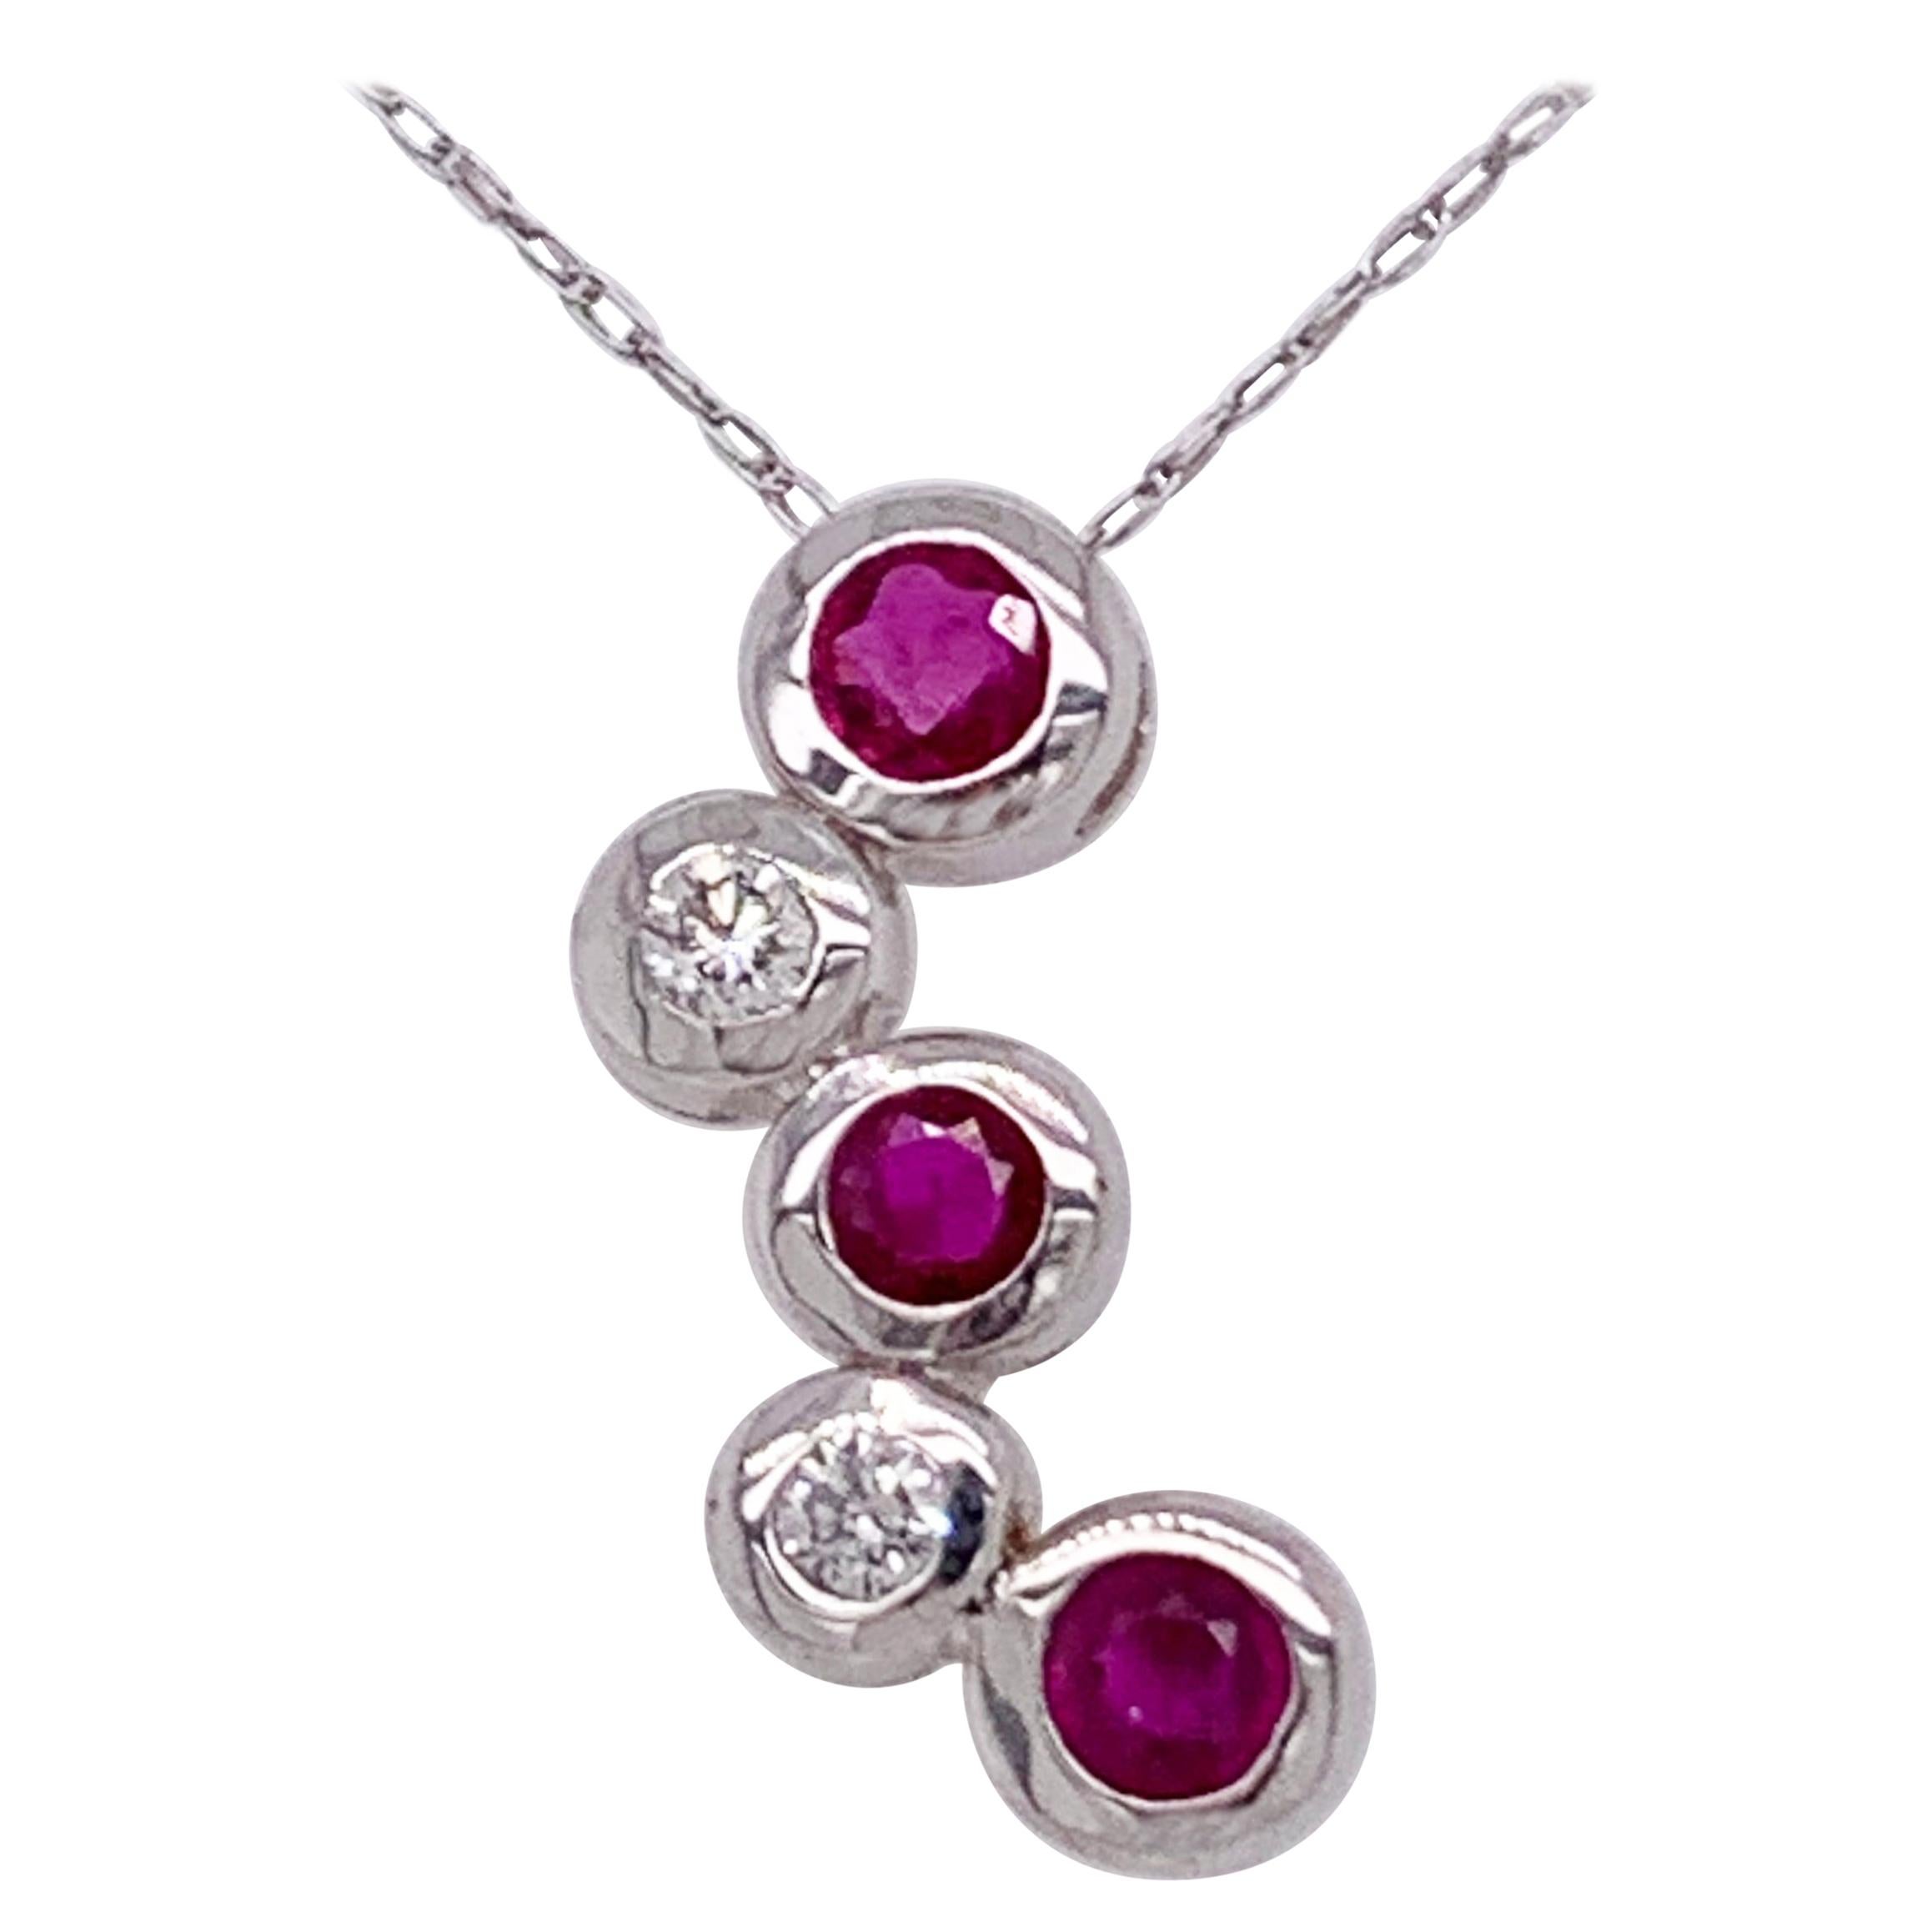 14kt Gold Ruby and Diamond Necklace Having 3 Rubies and 2 Round Diamonds